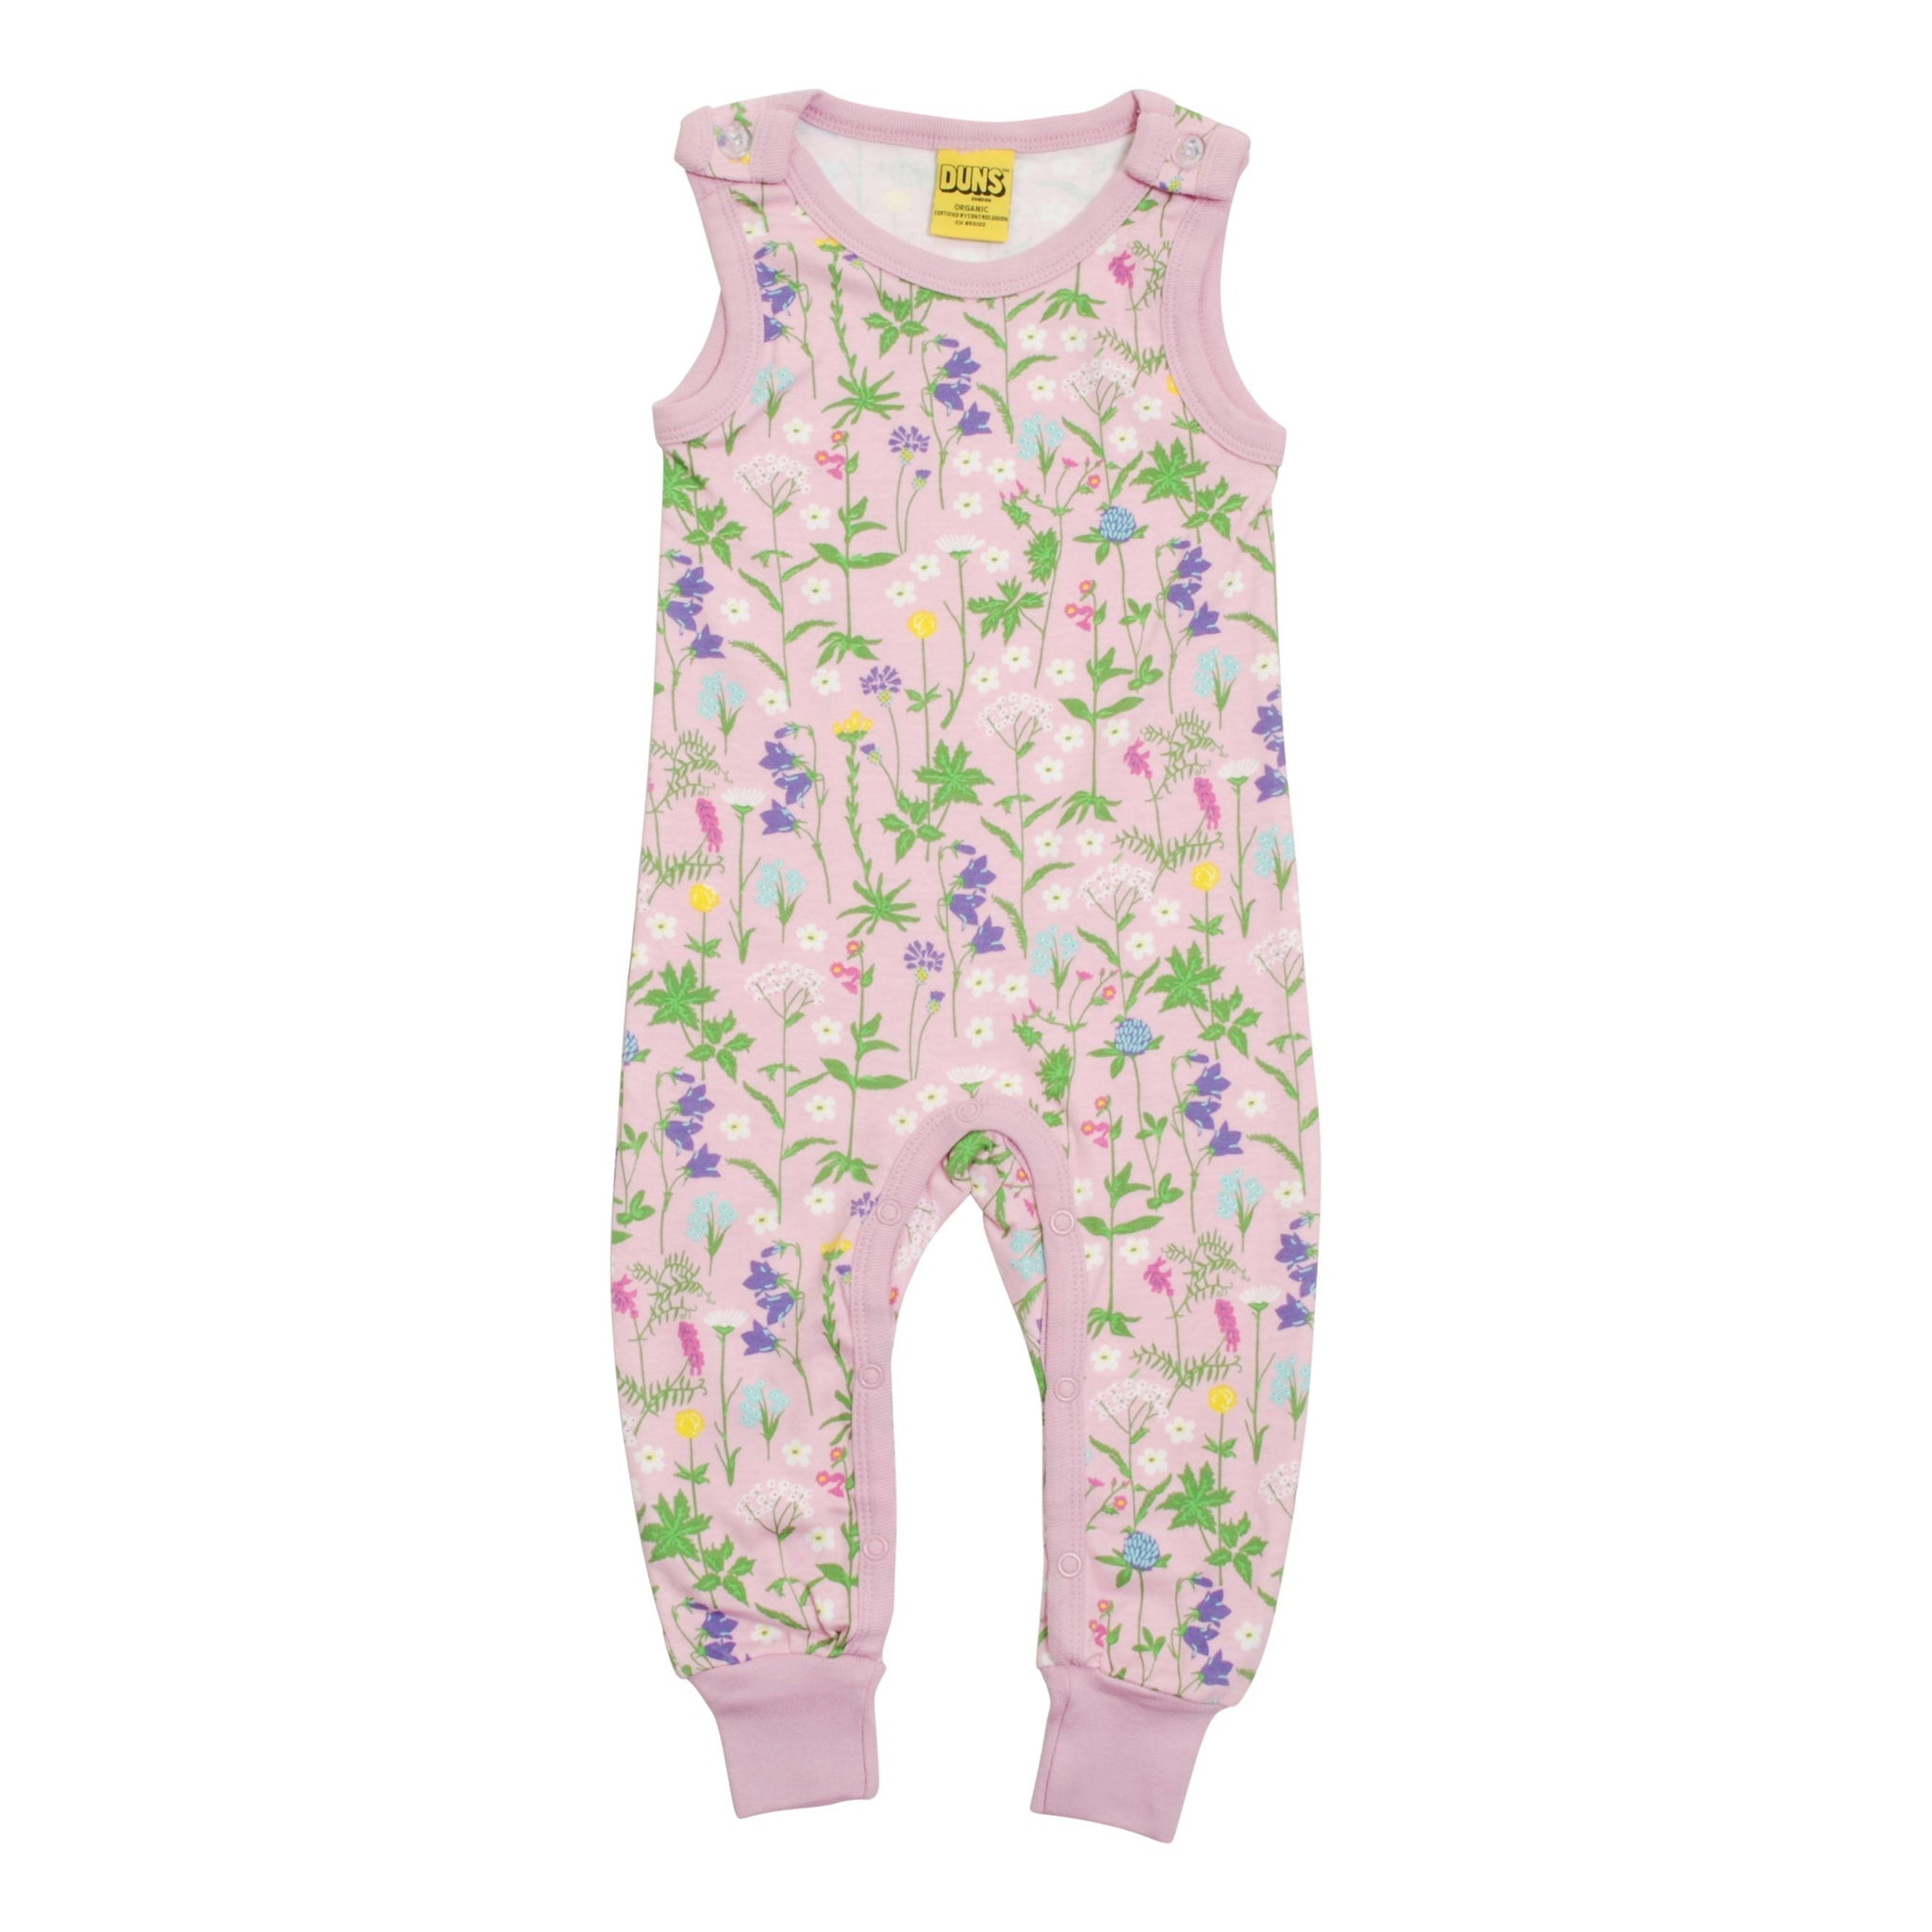 DUNS Sweden - Wild Flowers Dungarees (Pink)